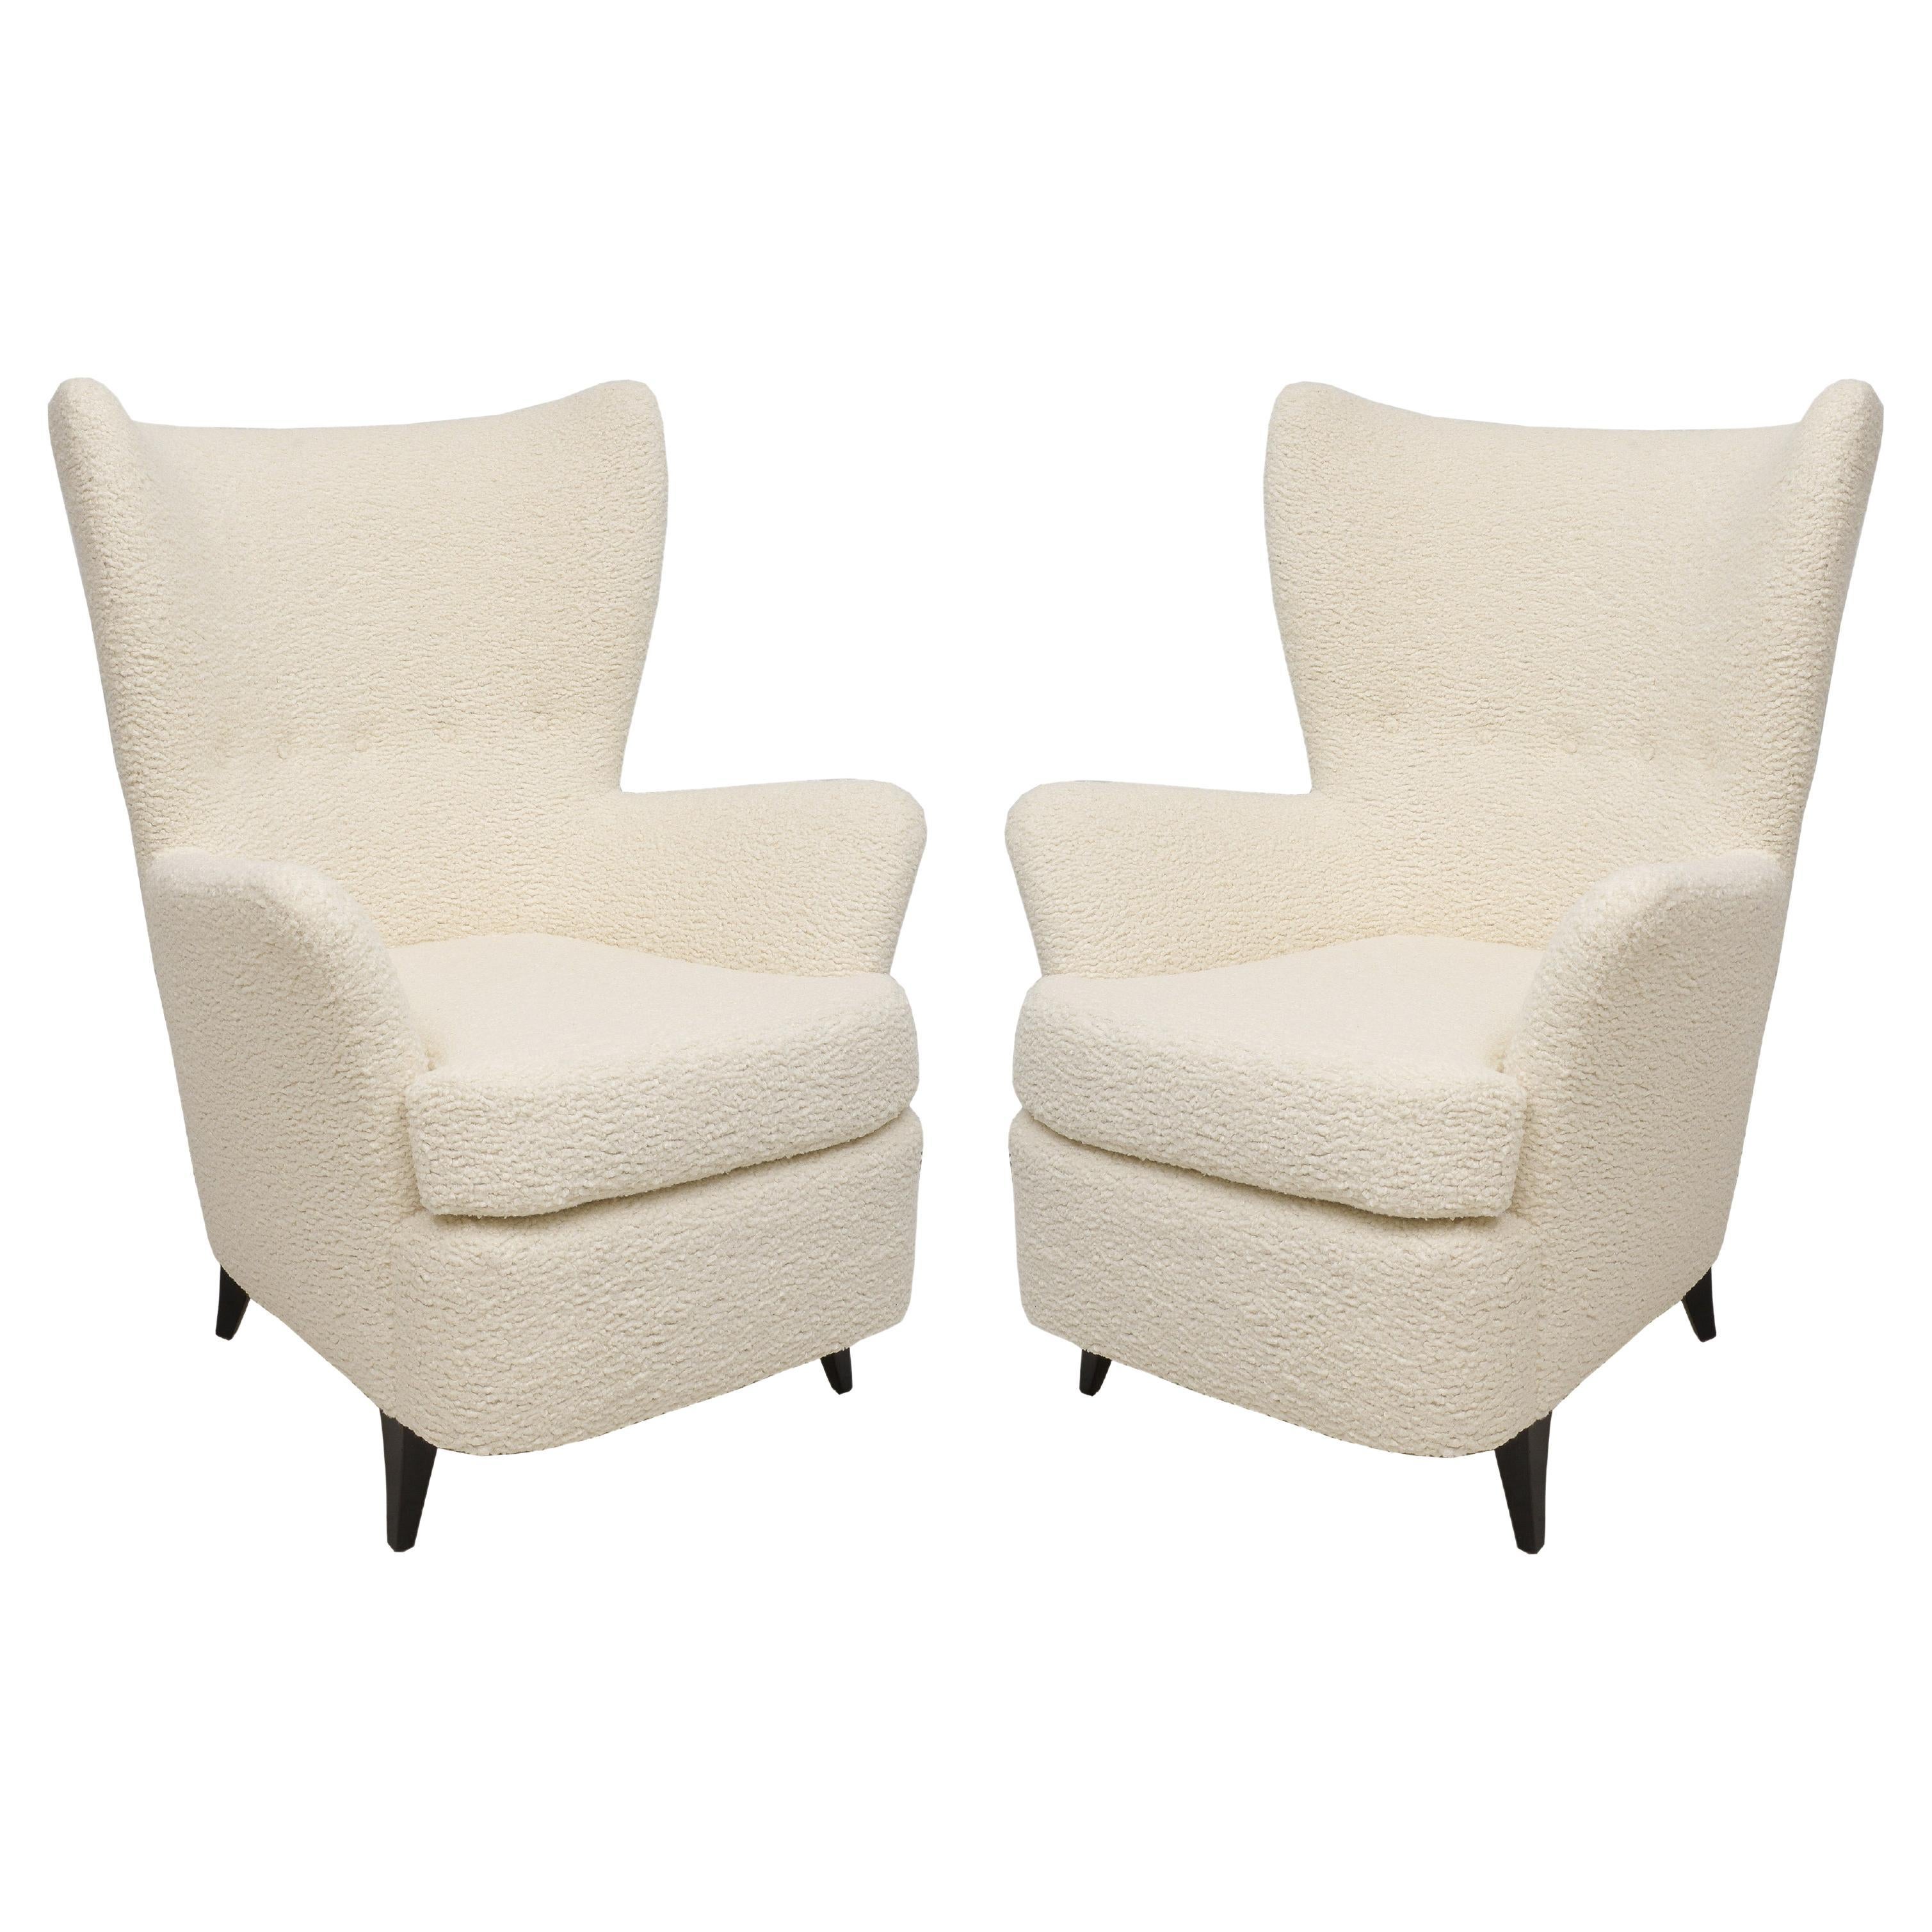 Pair of Italian Mid-Century Modern Lounge Chairs For Sale